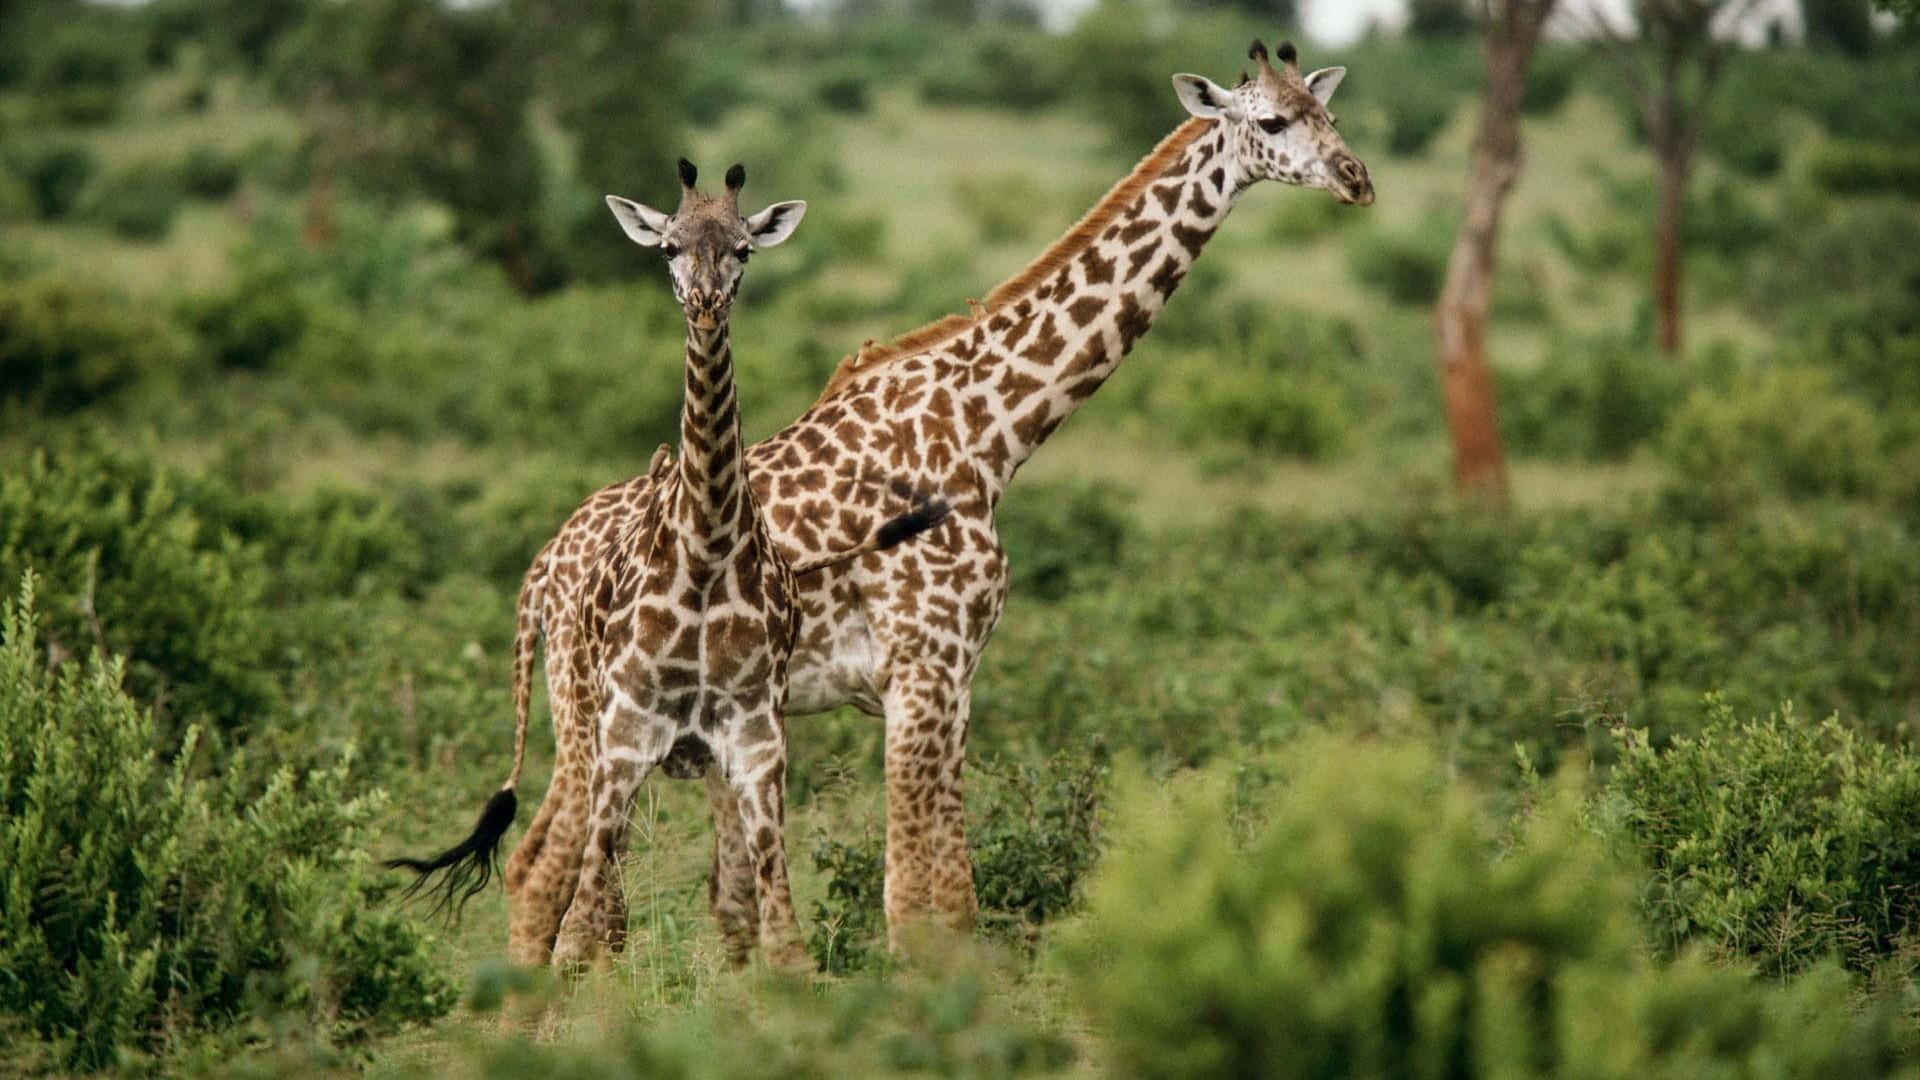 Adorable baby giraffe surrounded by nature